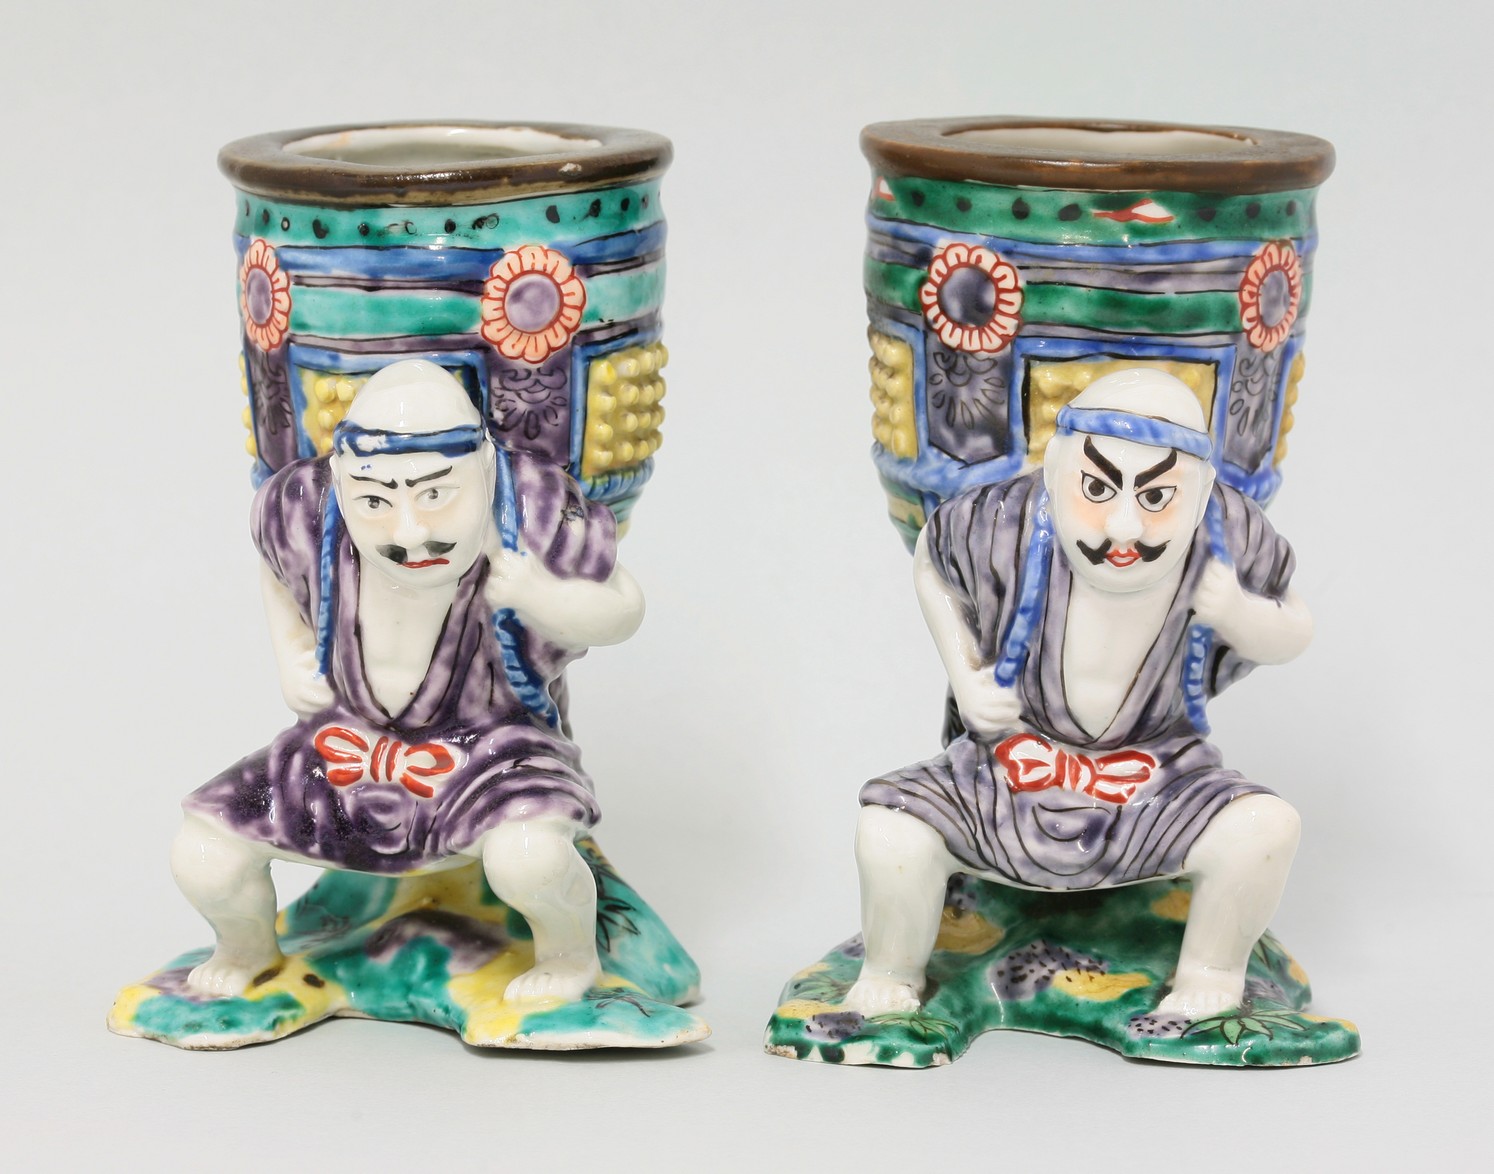 A pair of Kutani Vases,
late 19th century, each in the form of Benkei, a massive temple bell on